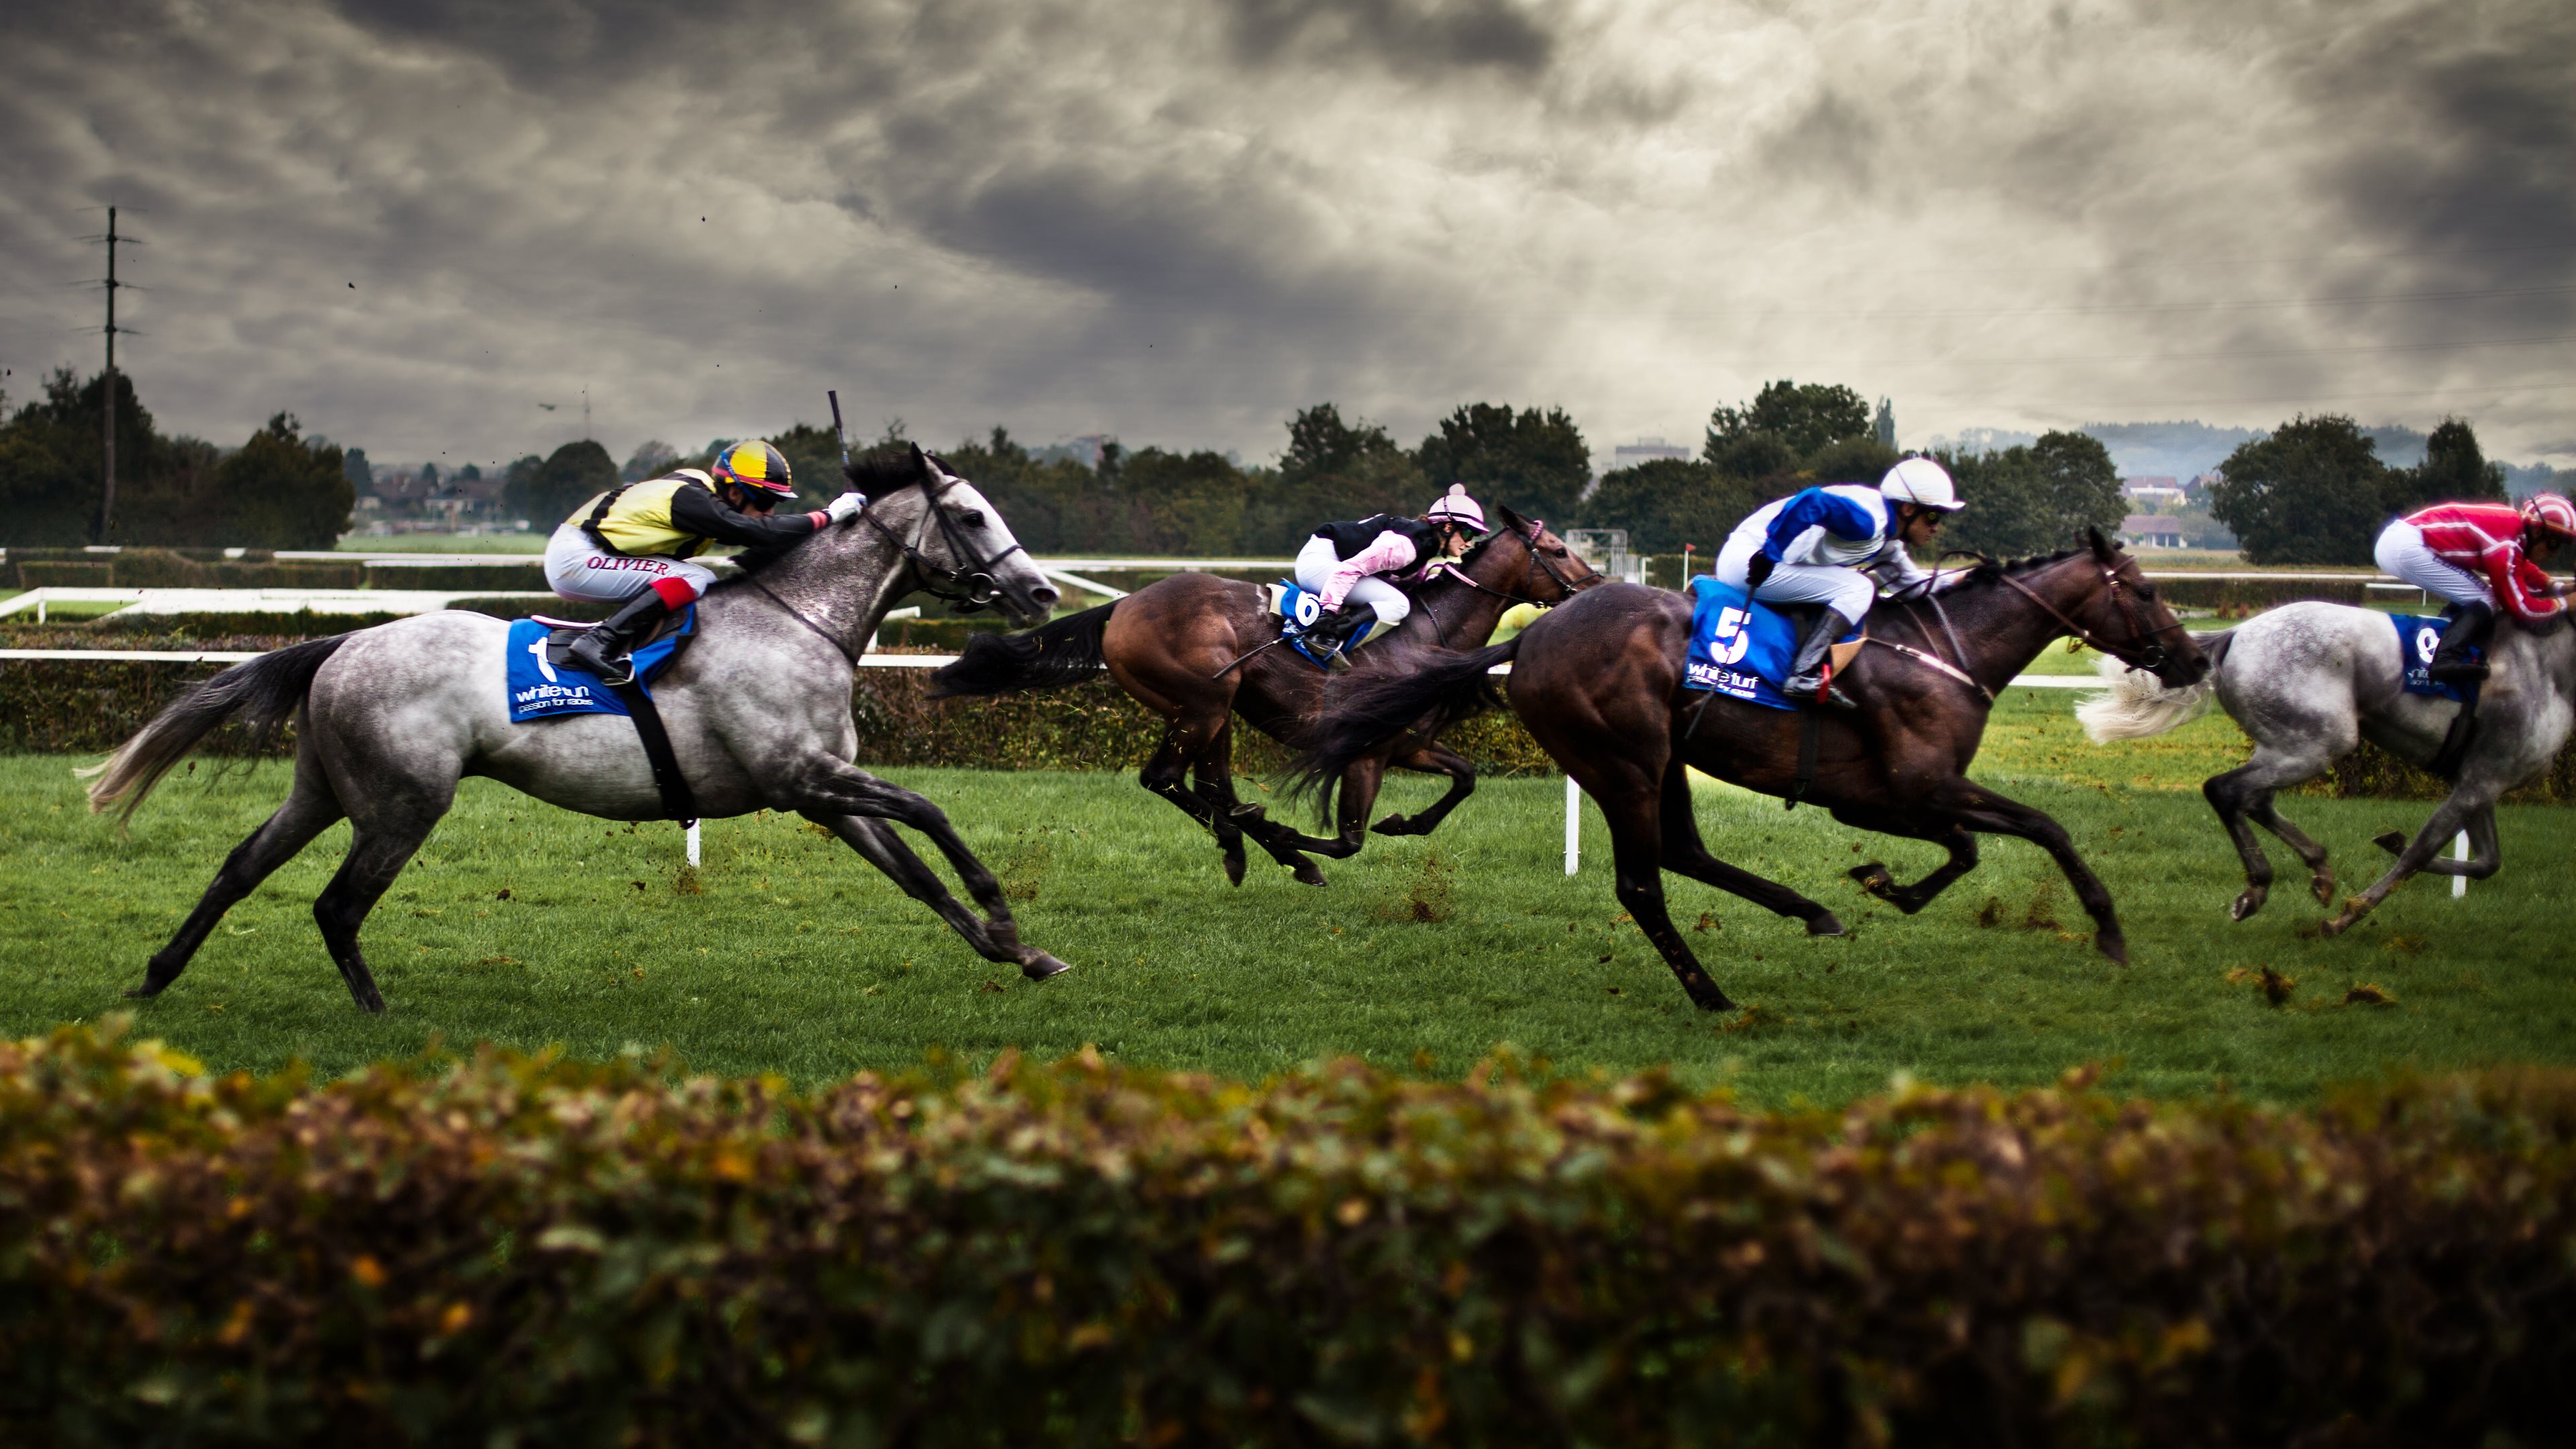 Horse racing uhd wallpapers - Ultra High Definition Wallpapers ...